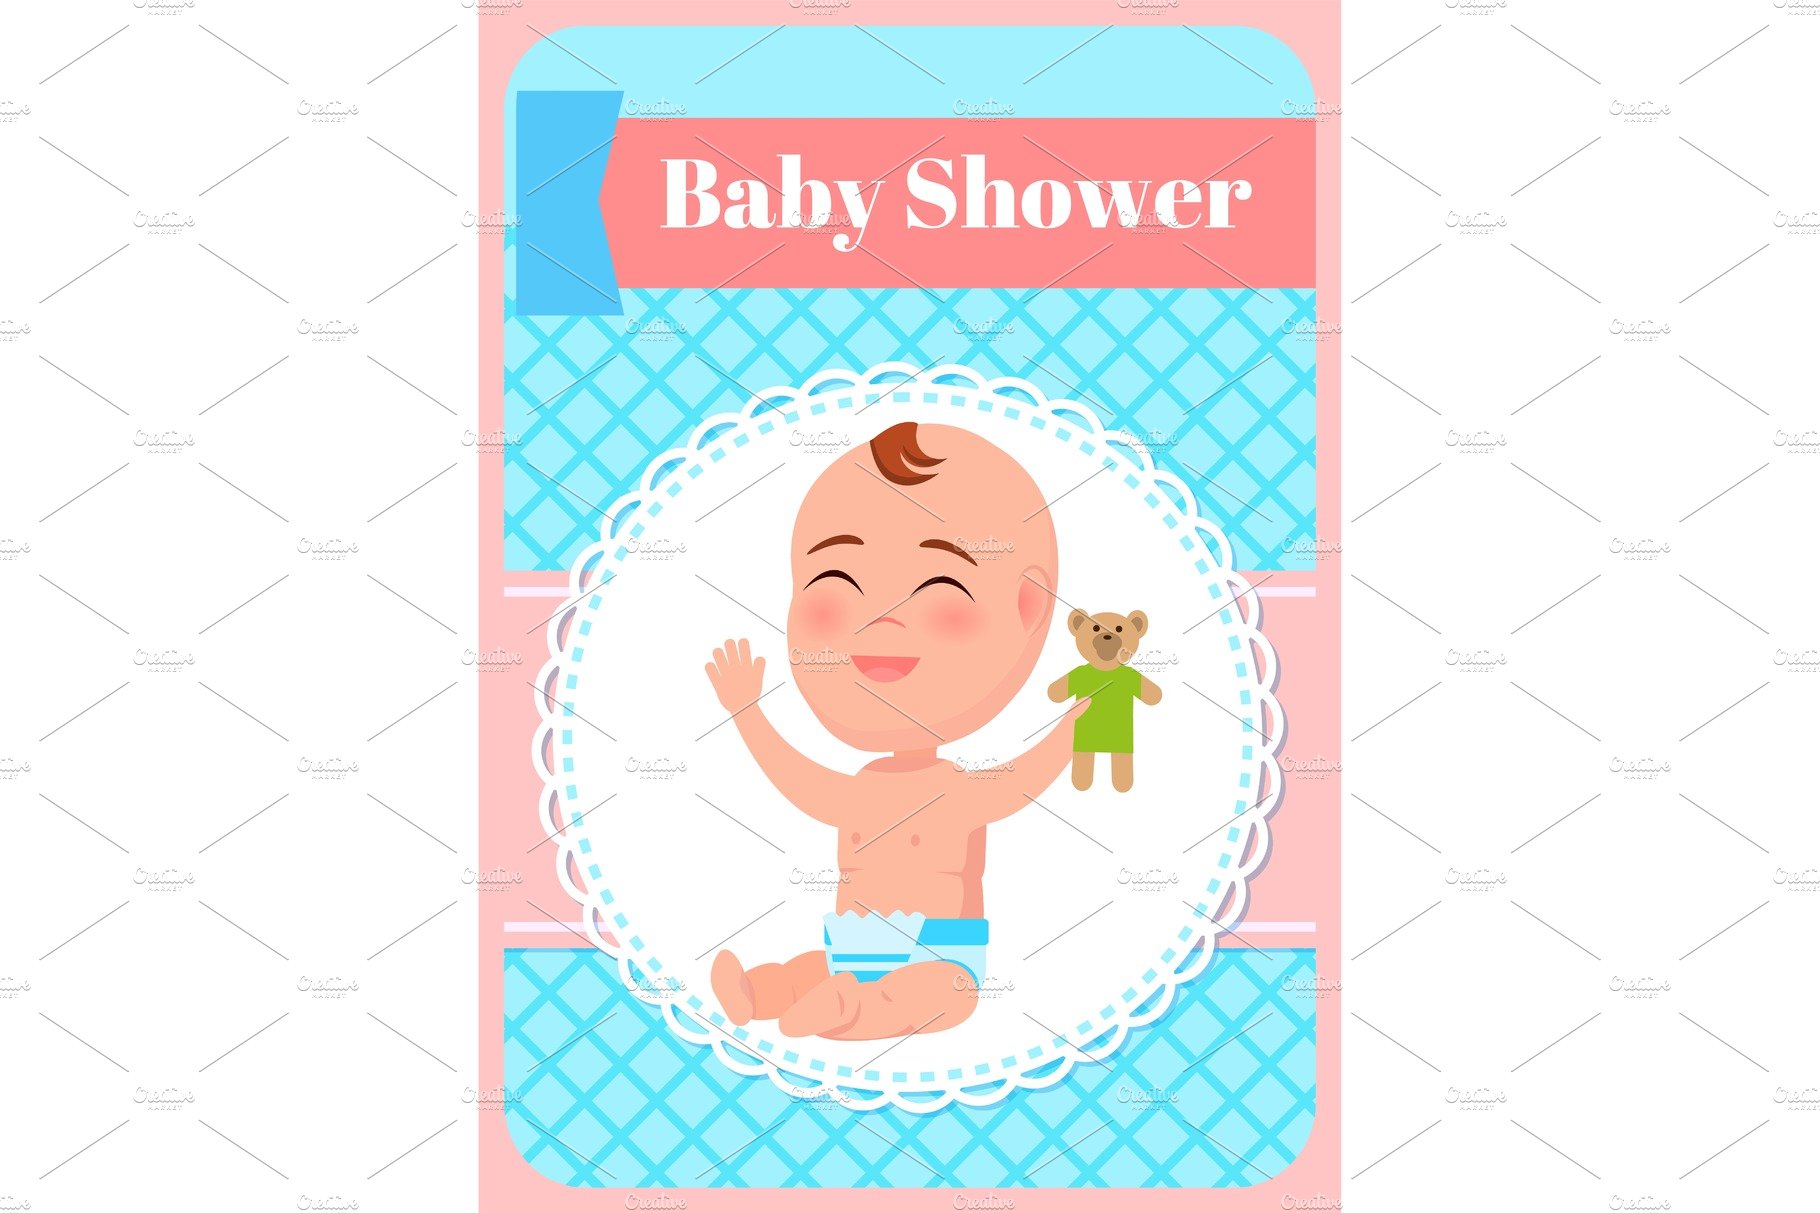 Baby Shower Poster, Infant Sitting cover image.